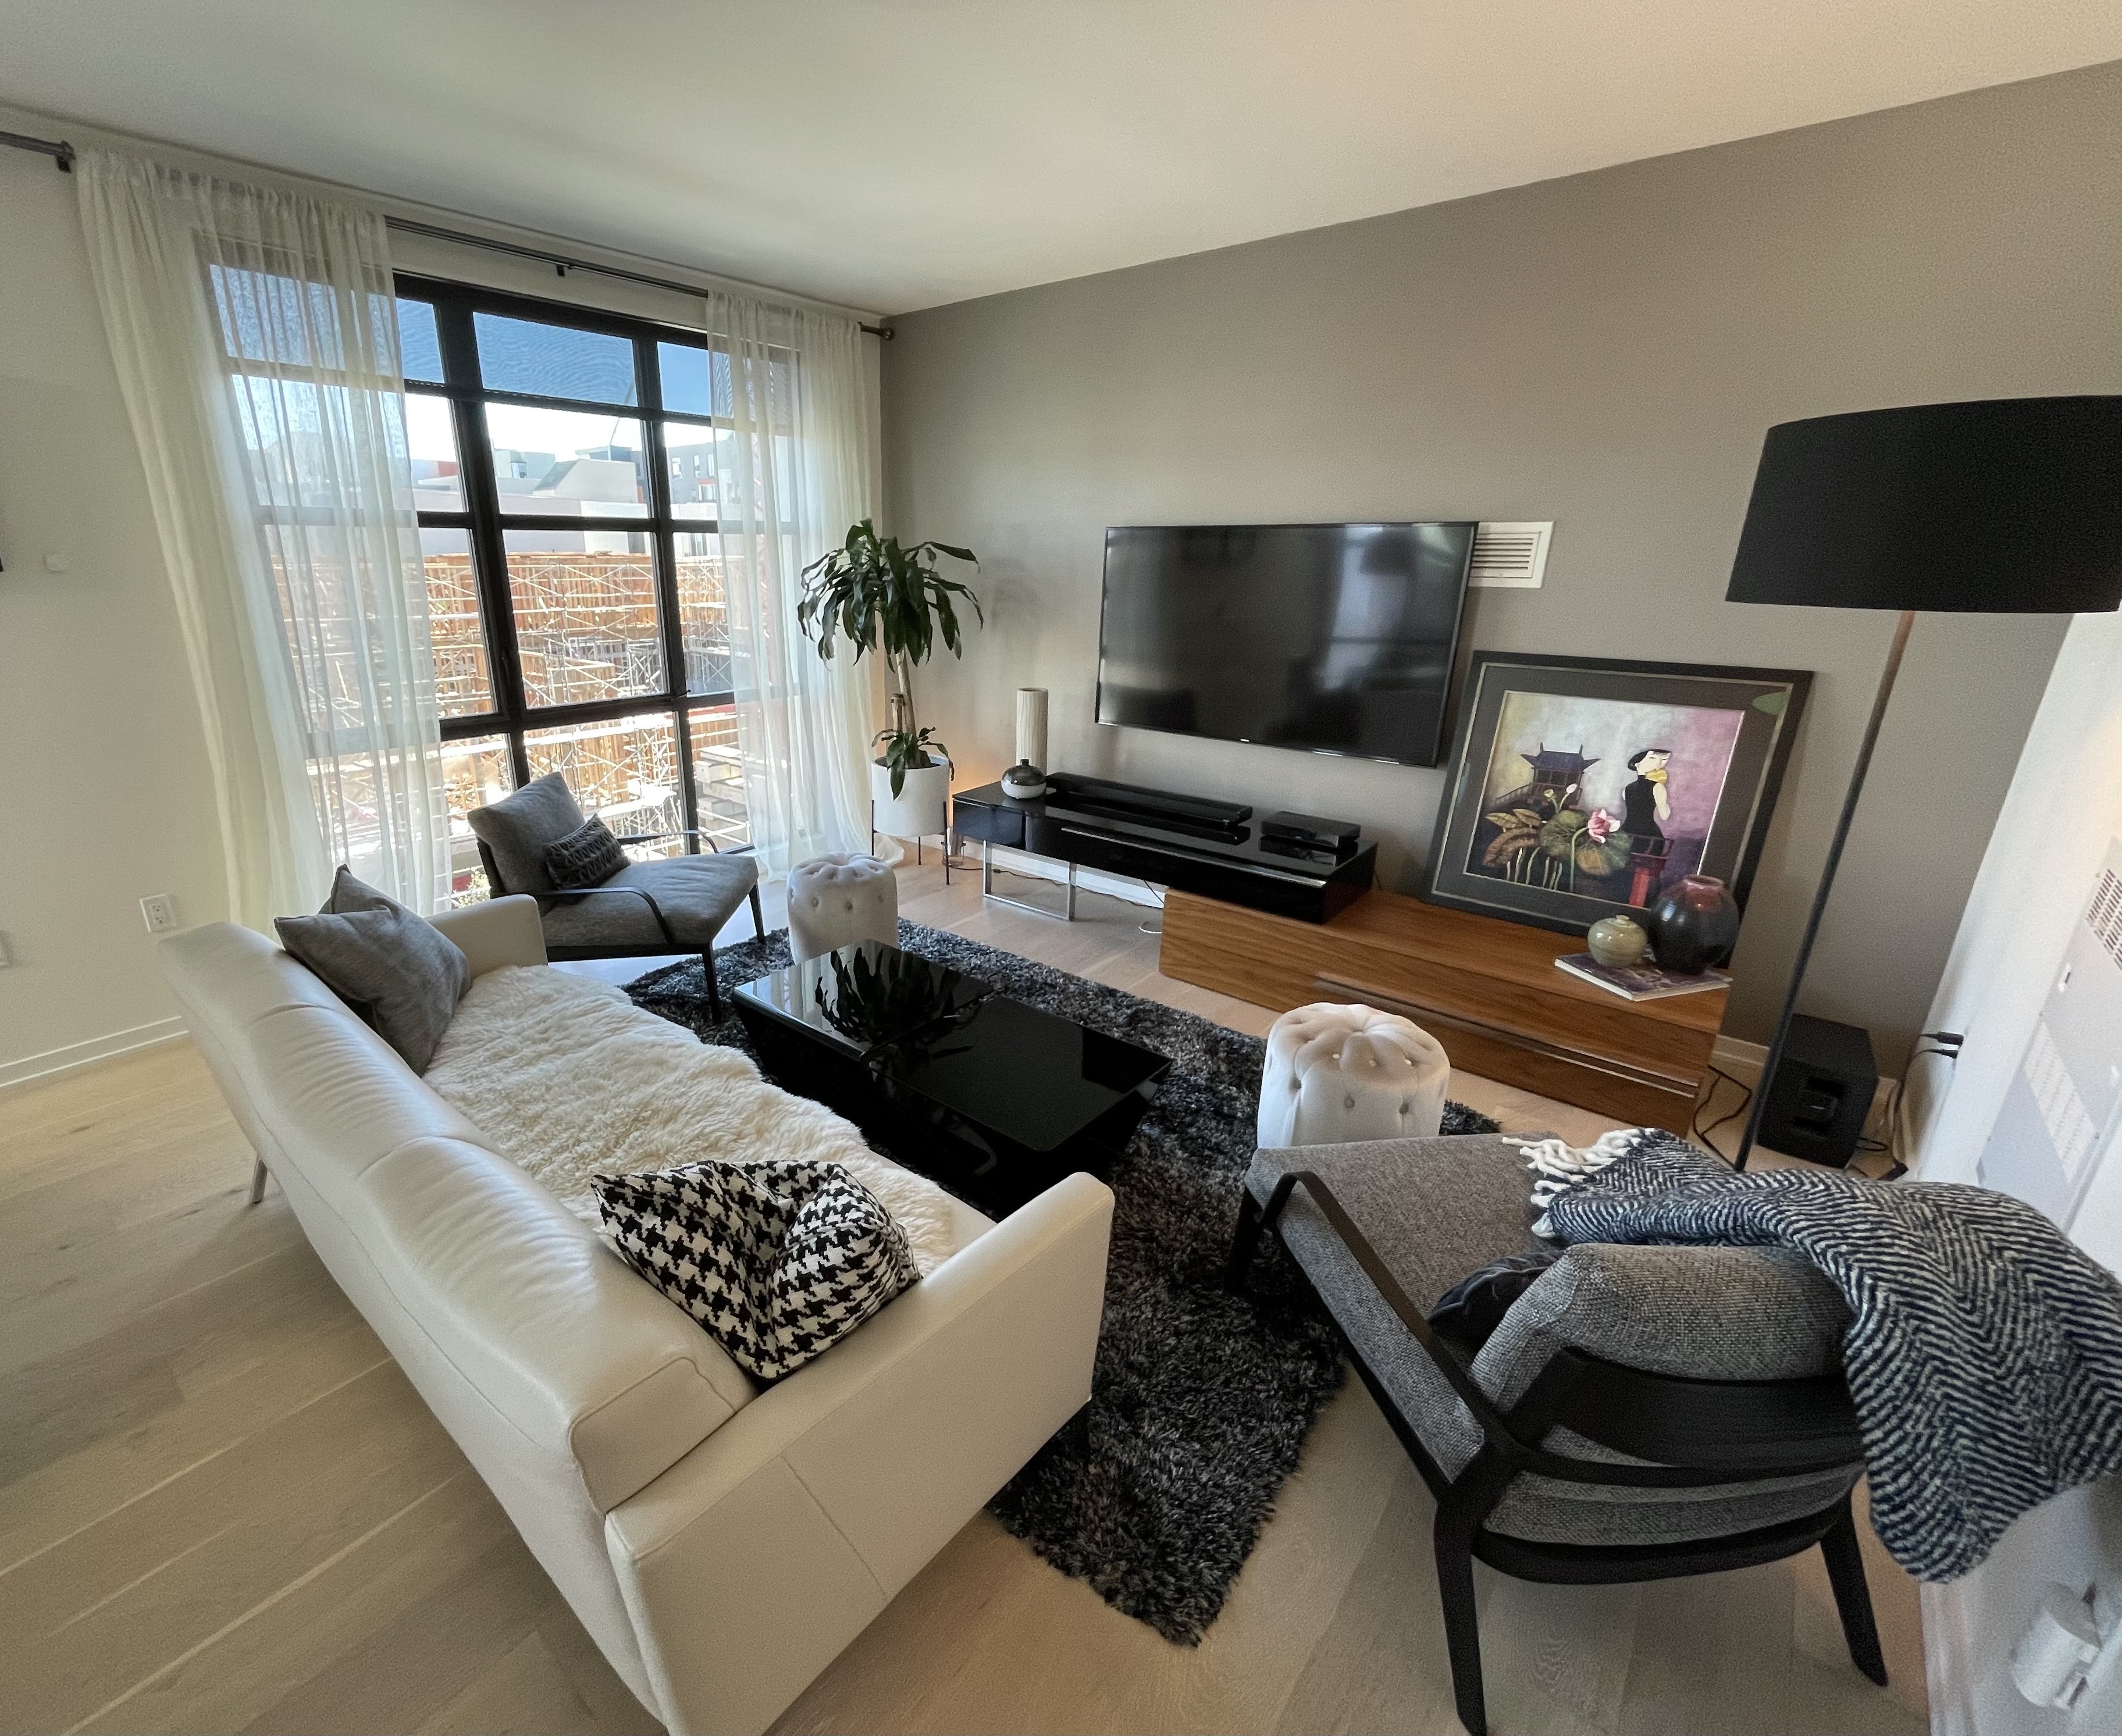 The staged interior of a San Francisco condo listed for sale is seen in a photo.